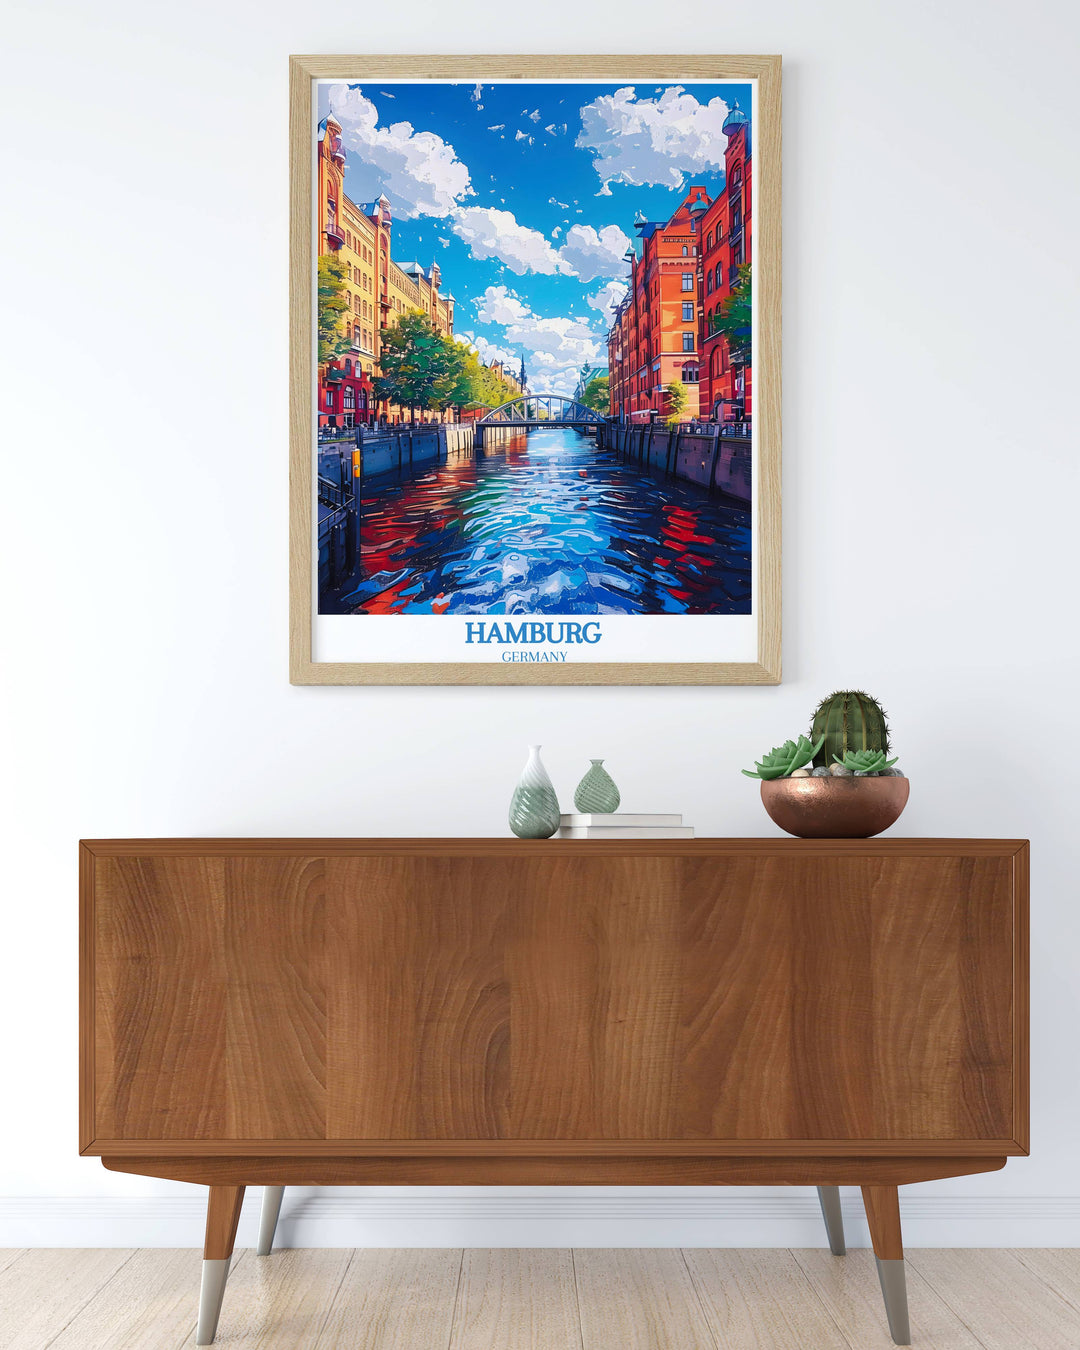 A warm and inviting housewarming gift featuring a detailed map of Hamburg, highlighting key landmarks and cultural spots.